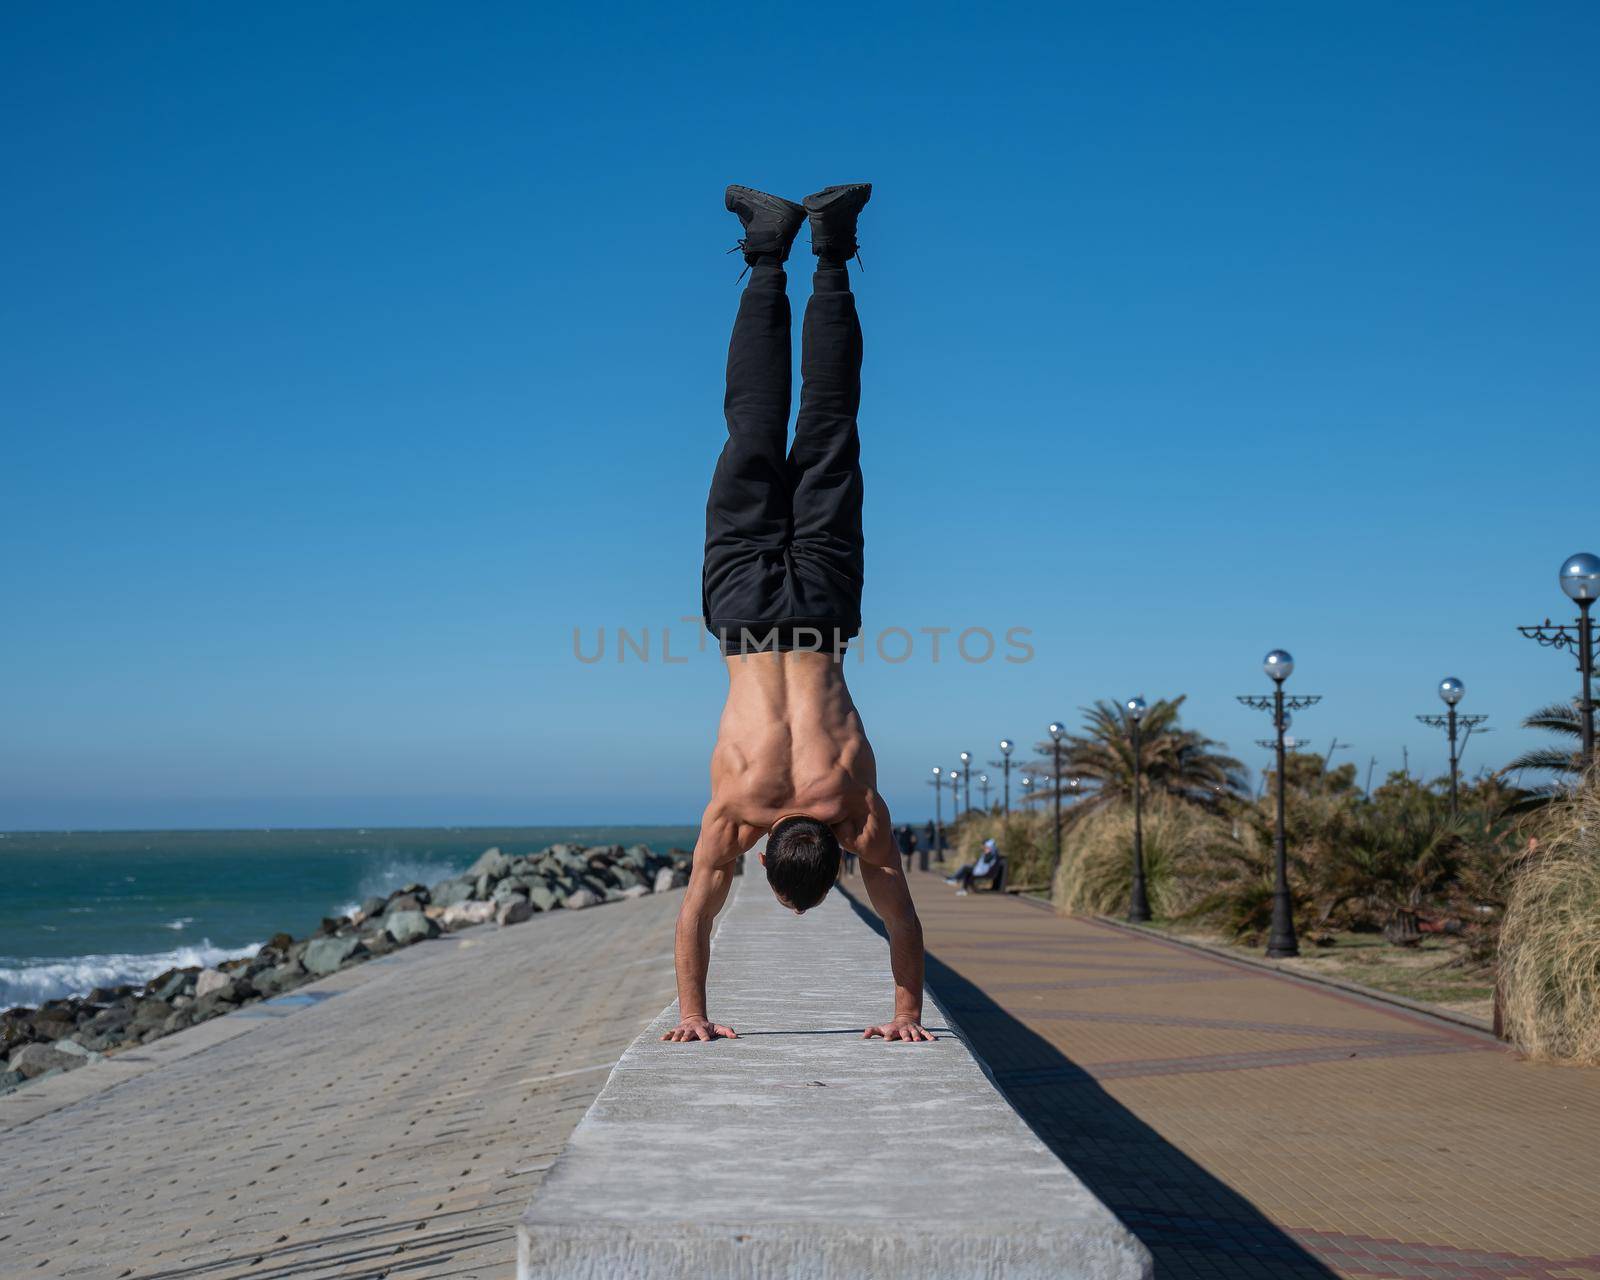 Shirtless man doing a handstand on the seashore. by mrwed54